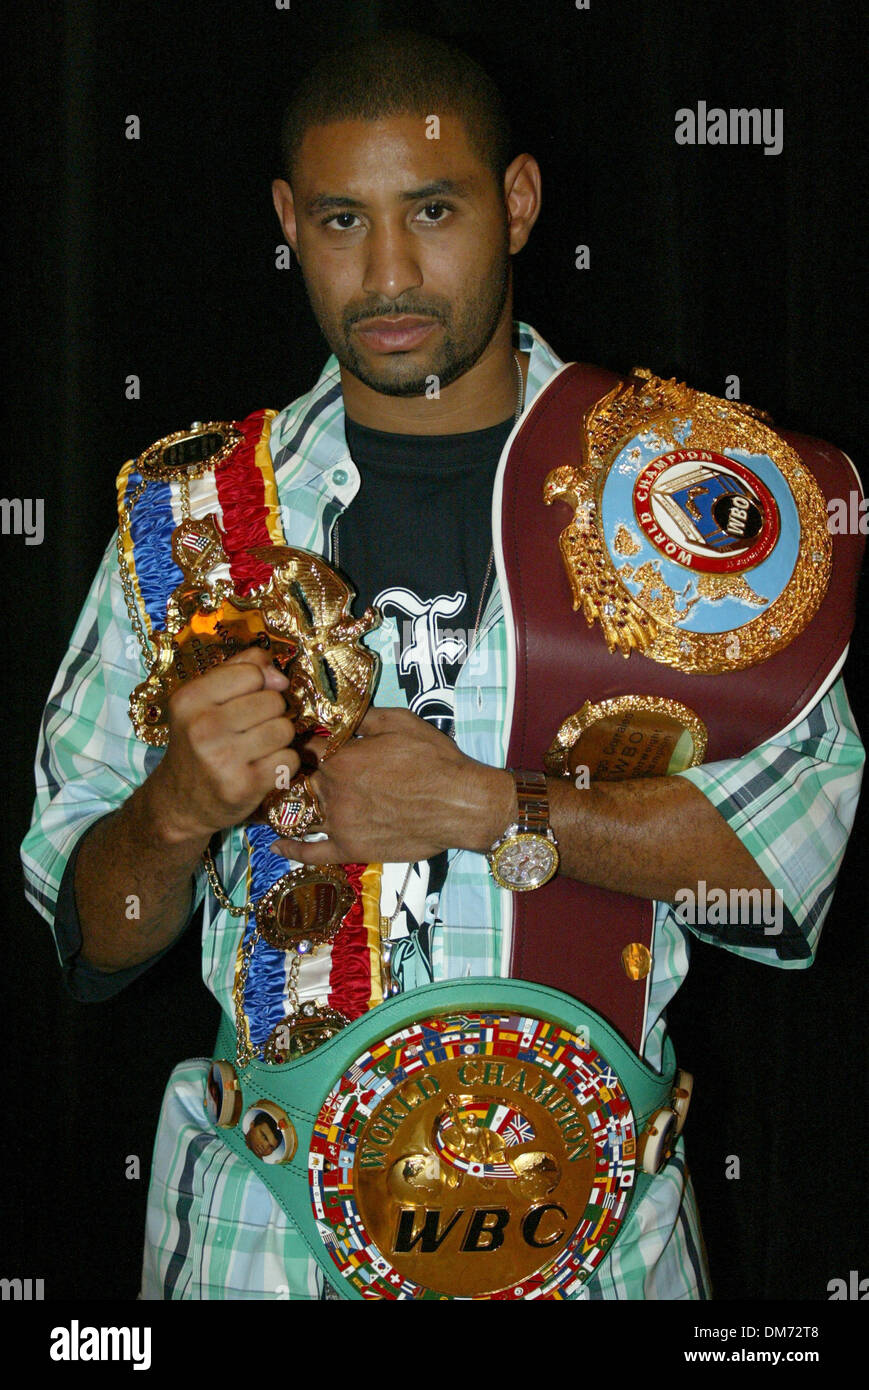 Jul 20, 2005; Las Vegas, NV, USA; DIEGO 'CHICO' CORRALES poses with all his three Championship belts at The 'Uno Mas' One More Time Press conference at Caesars Palace Hotel & Casino. Former Jr Bantamweight Champion Wayne McCullough presented CORRALES with the most prestigous belt a fighter can receive, The Ring Magazine Belt for being the best in the World in his weight class. Corr Stock Photo